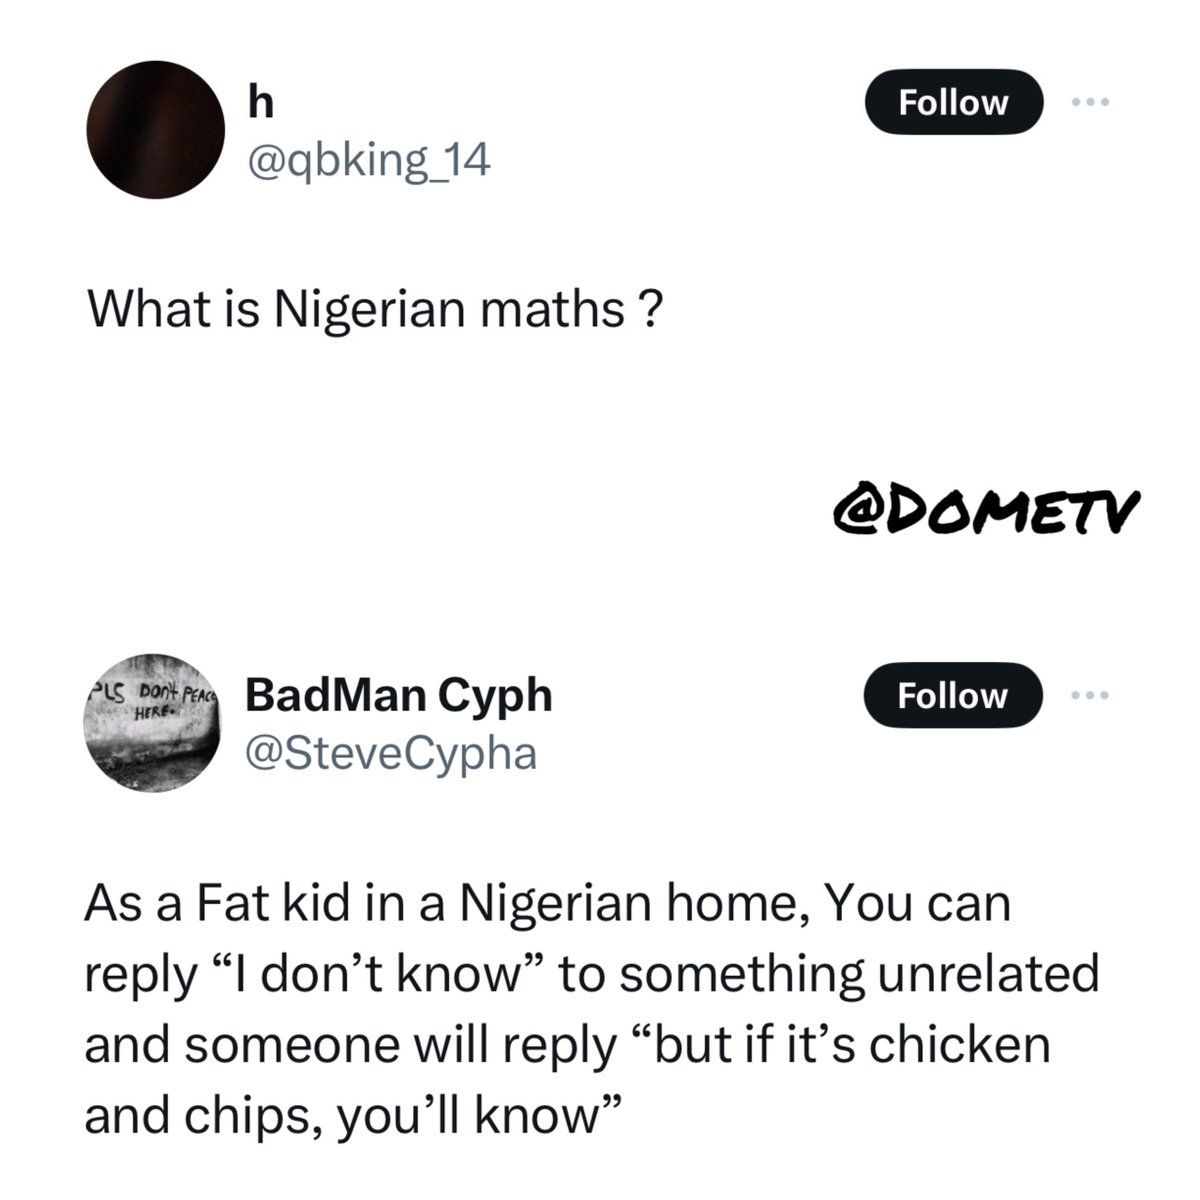 Twitter funny replies/videos.

1. You’ll always know once it’s food 😂